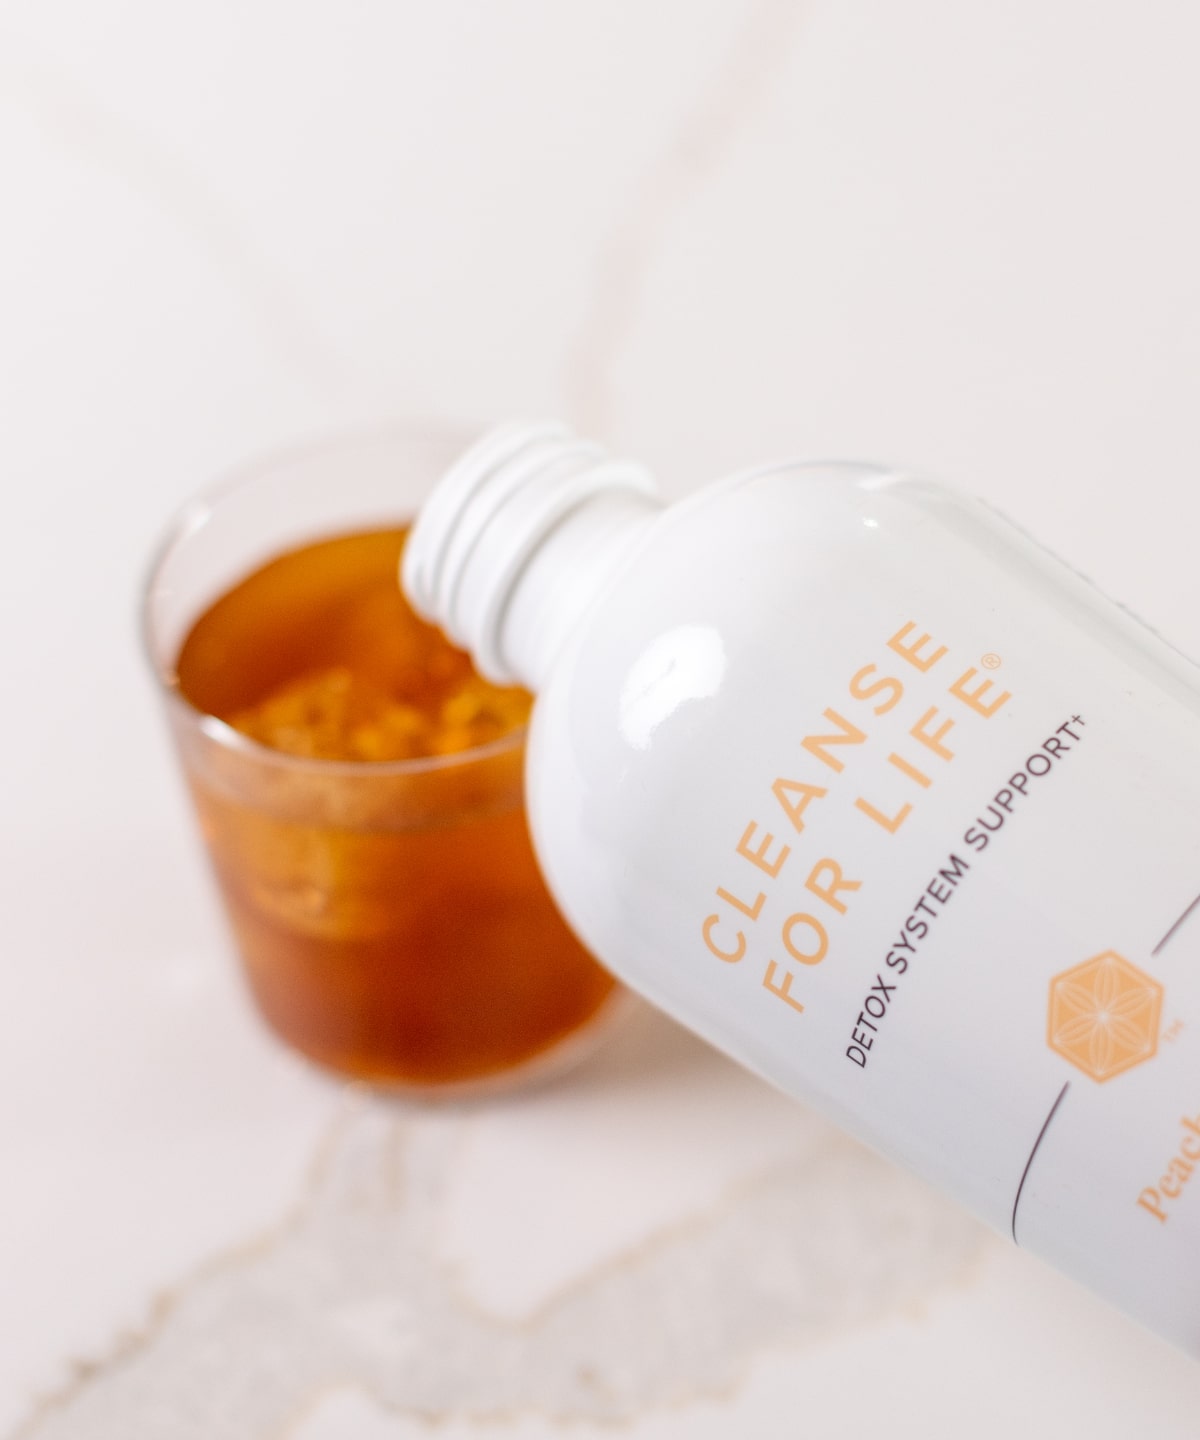 Cleanse for Life®  Peach Mango Ready-to-Drink